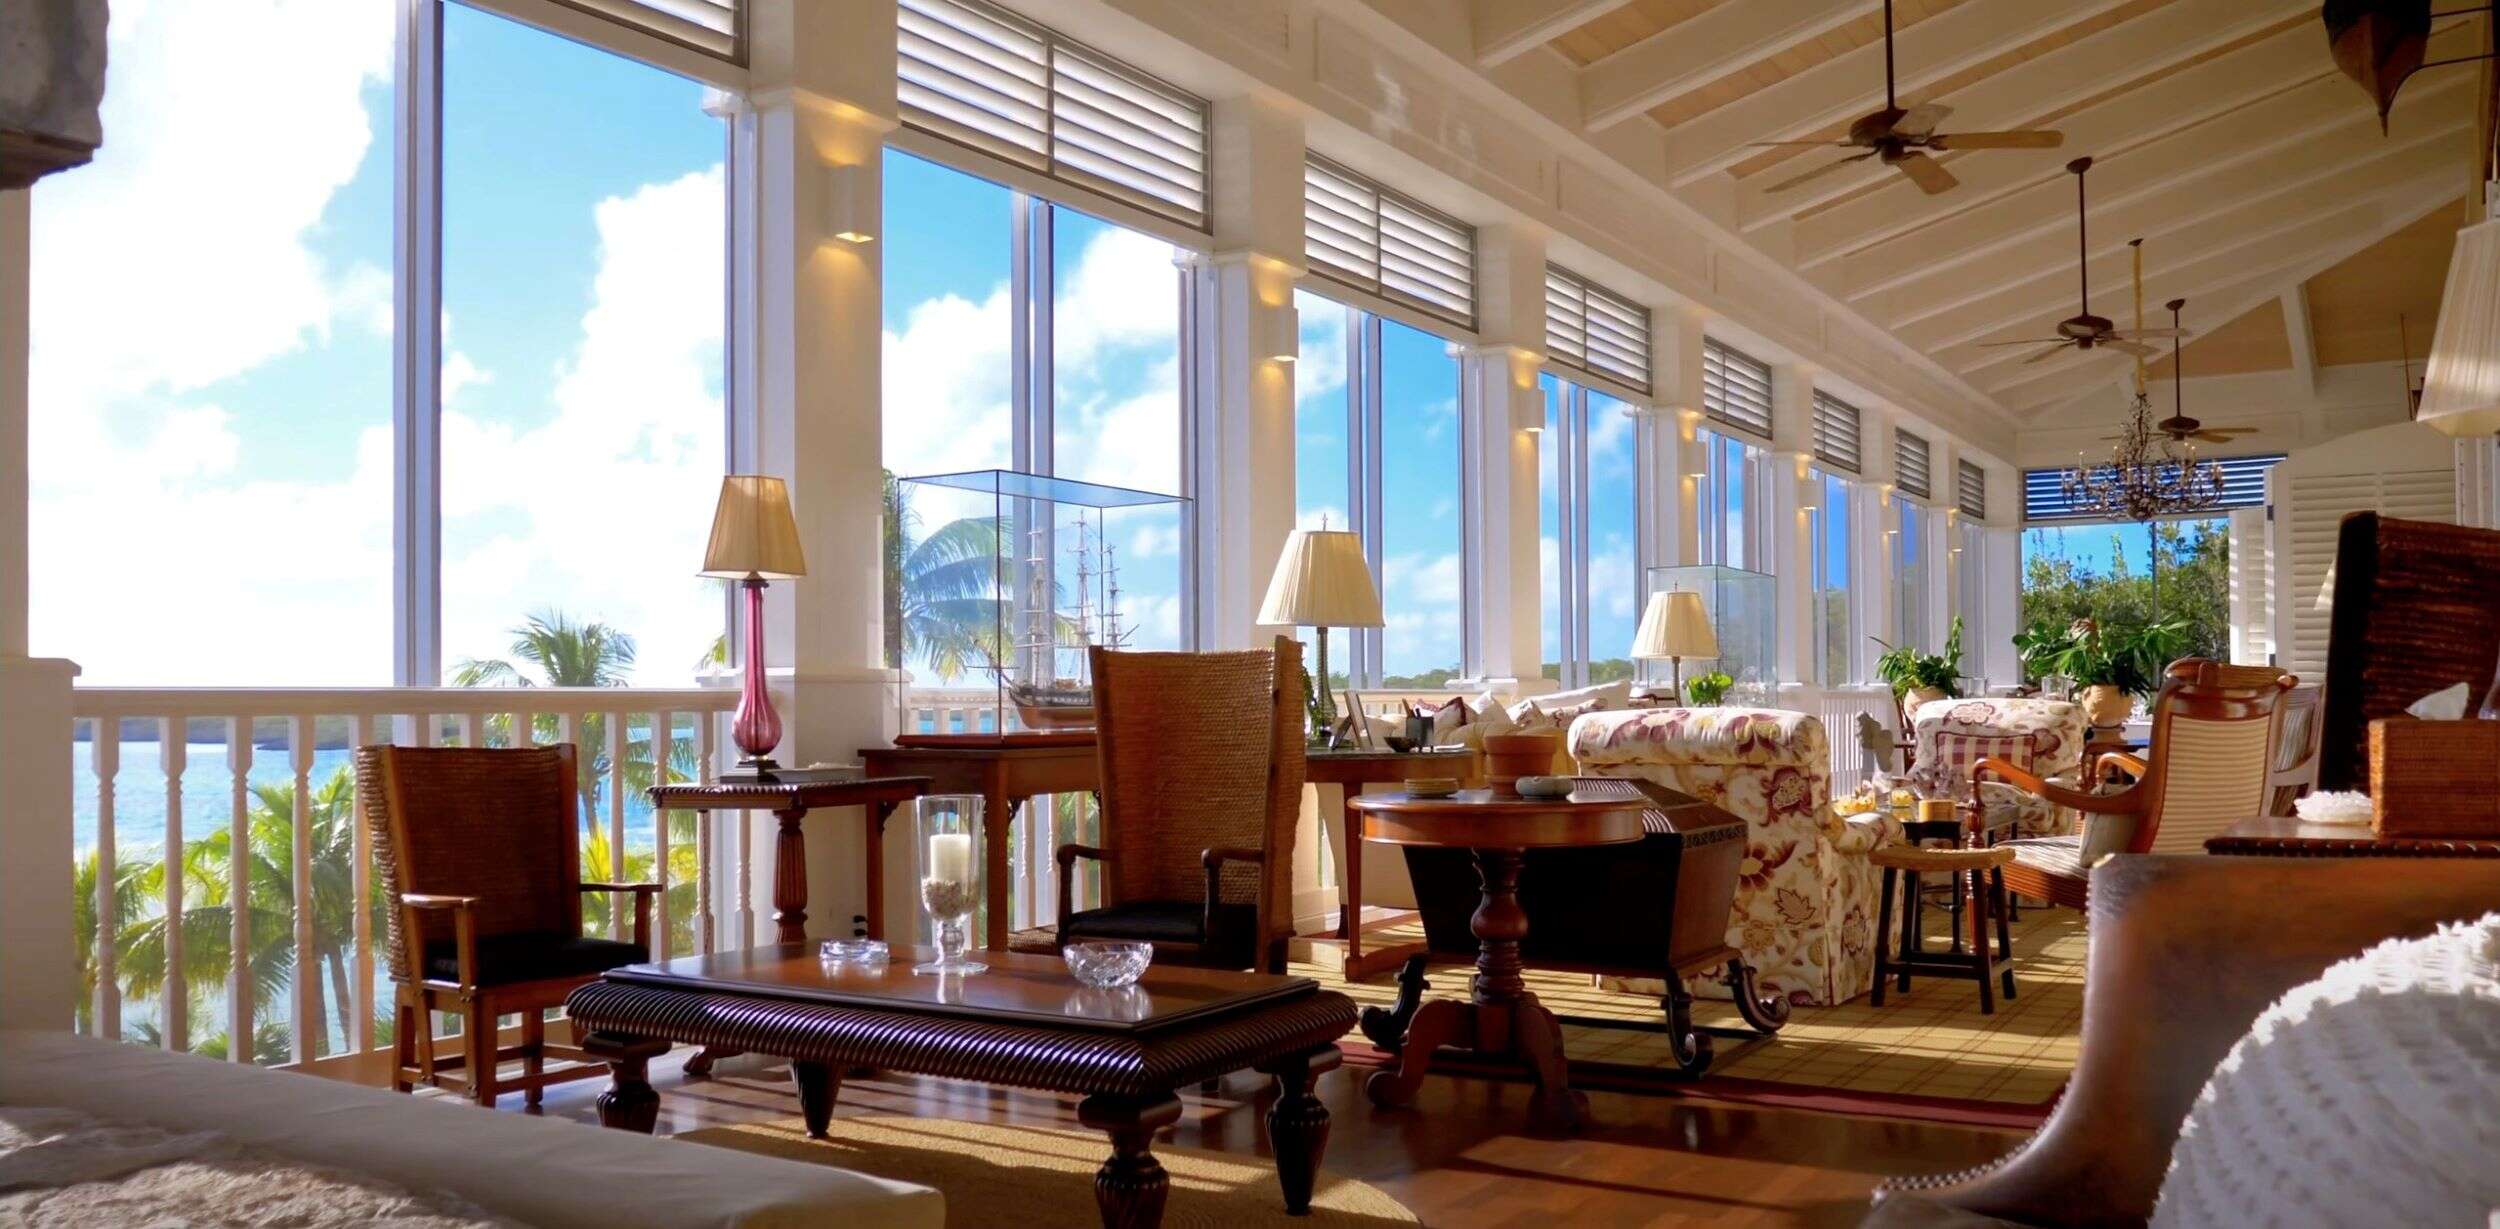 Little Pipe Cay Island main residence interior